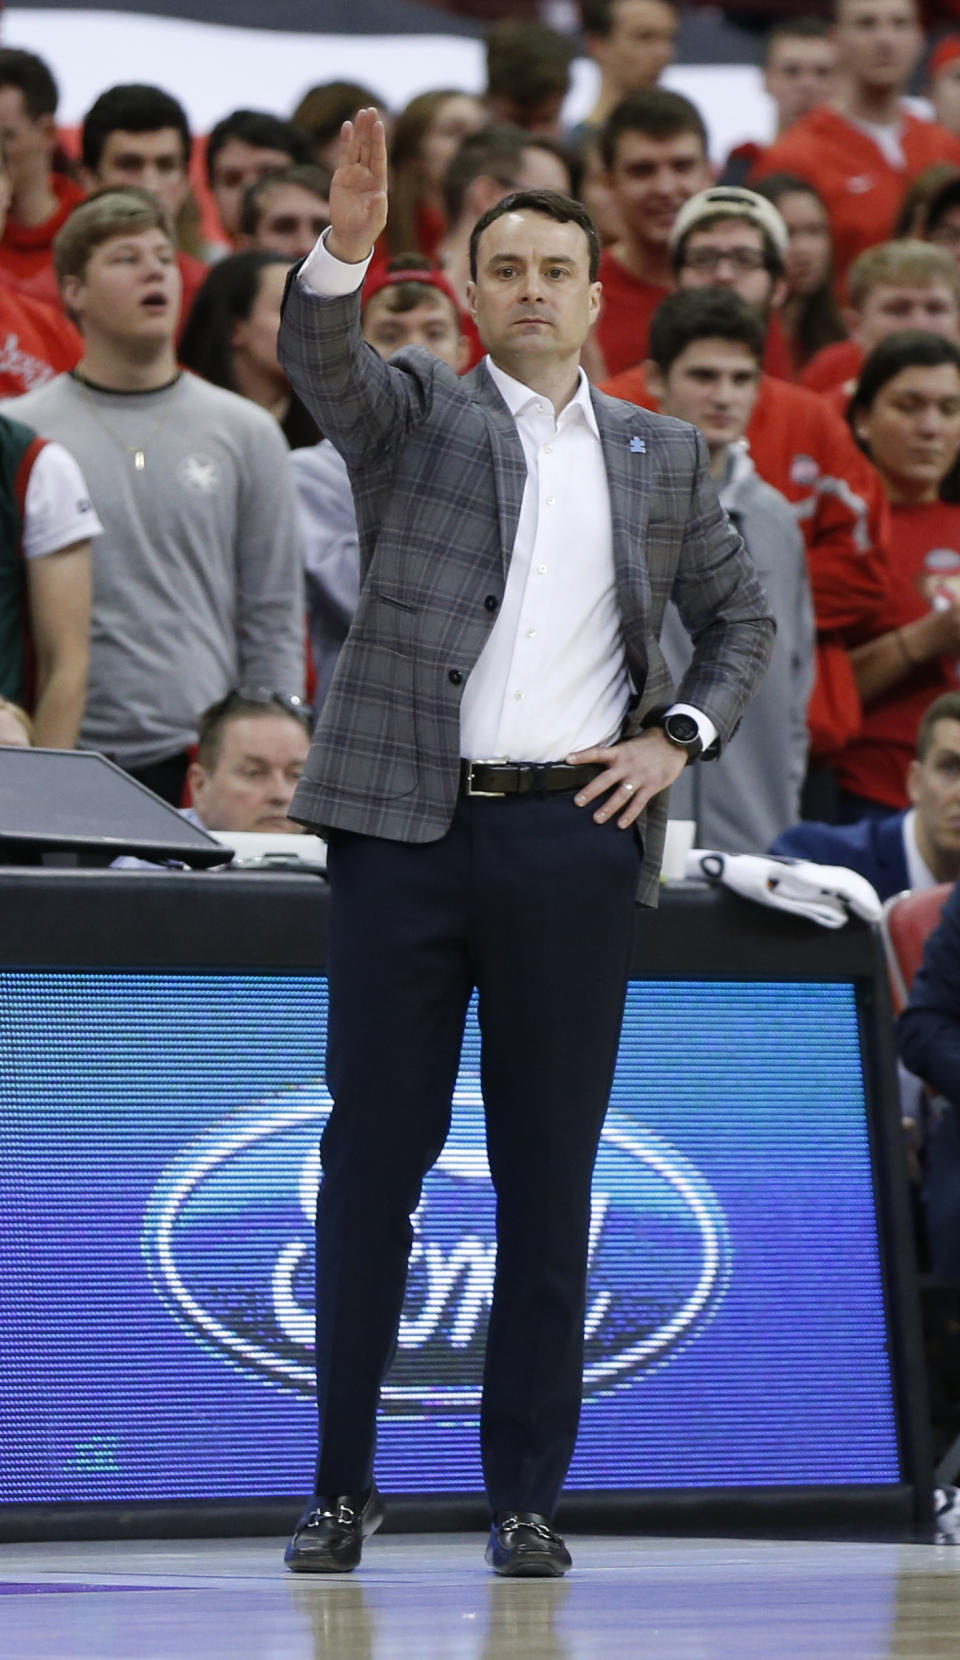 Indiana head coach Archie Miller instructs his team during the first half of an NCAA college basketball game against Ohio State, Saturday, Feb. 1, 2020, in Columbus, Ohio. (AP Photo/Jay LaPrete)